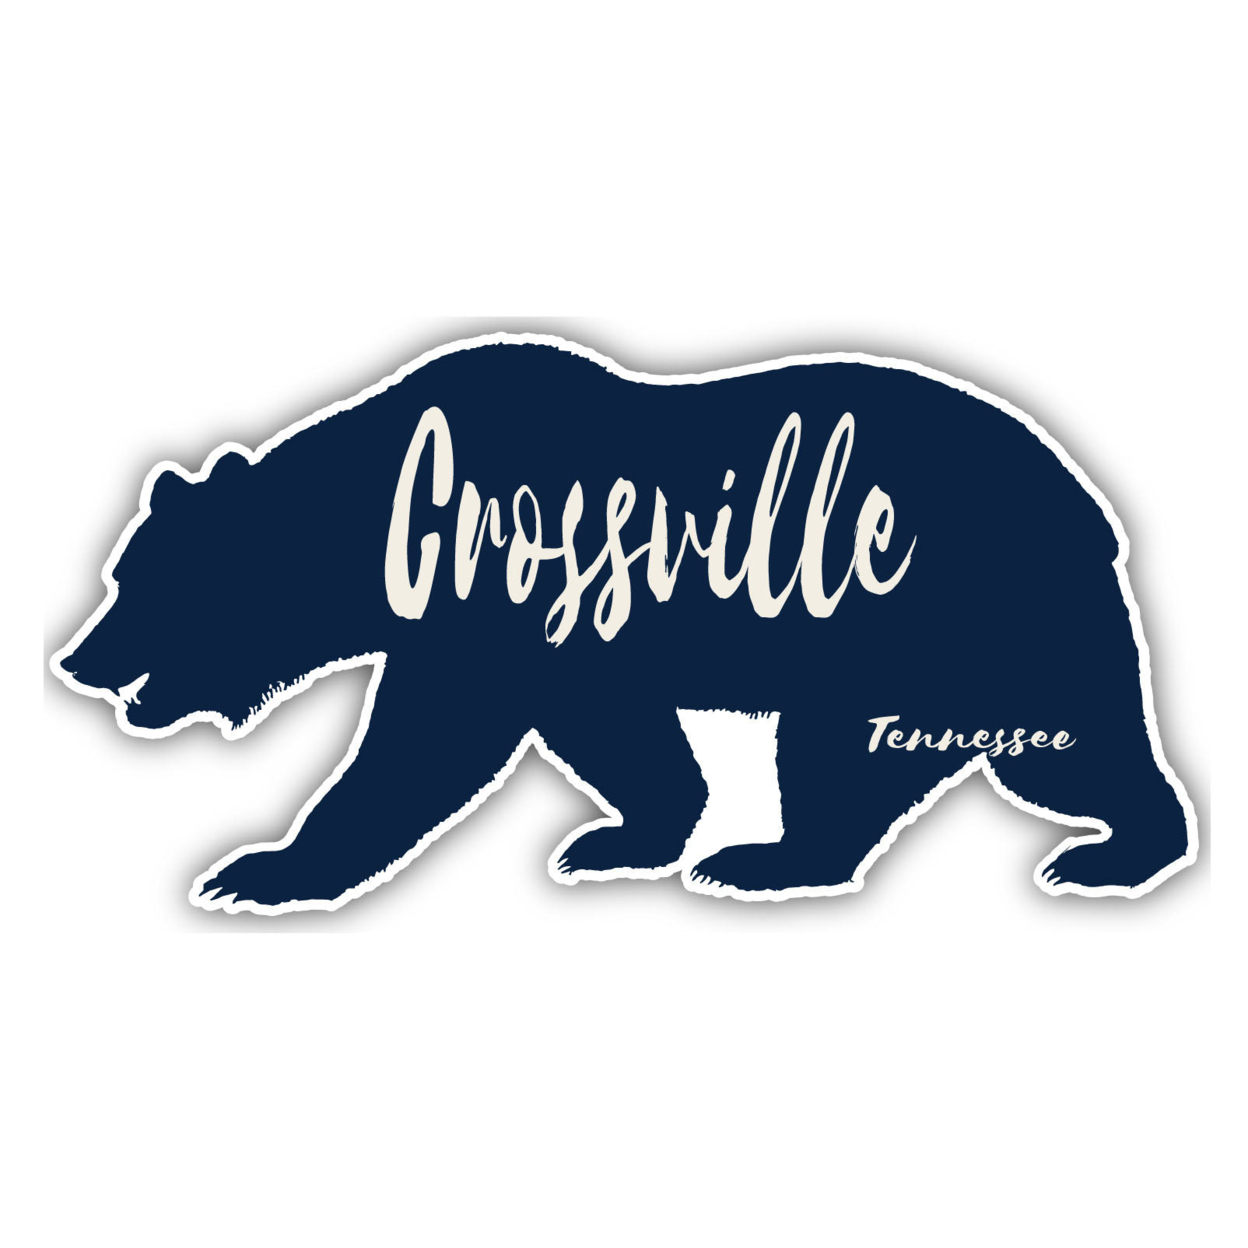 Crossville Tennessee Souvenir Decorative Stickers (Choose Theme And Size) - Single Unit, 6-Inch, Tent